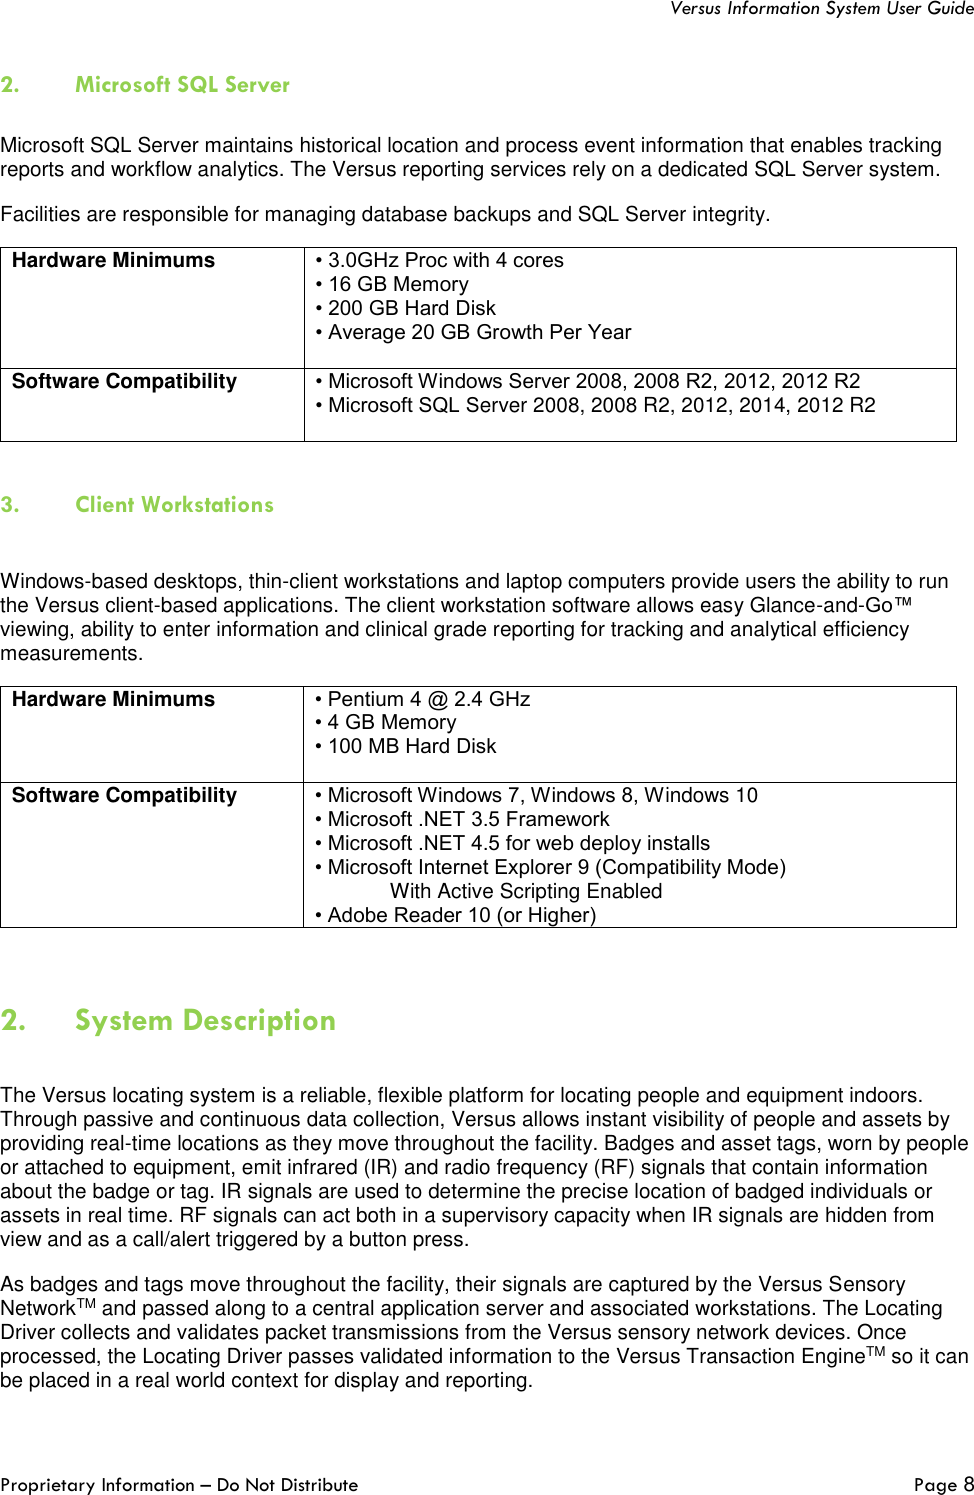   Versus Information System User Guide  Proprietary Information – Do Not Distribute   Page 8  2. Microsoft SQL Server    Microsoft SQL Server maintains historical location and process event information that enables tracking reports and workflow analytics. The Versus reporting services rely on a dedicated SQL Server system.  Facilities are responsible for managing database backups and SQL Server integrity. Hardware Minimums • 3.0GHz Proc with 4 cores  • 16 GB Memory  • 200 GB Hard Disk  • Average 20 GB Growth Per Year  Software Compatibility • Microsoft Windows Server 2008, 2008 R2, 2012, 2012 R2  • Microsoft SQL Server 2008, 2008 R2, 2012, 2014, 2012 R2    3. Client Workstations  Windows-based desktops, thin-client workstations and laptop computers provide users the ability to run the Versus client-based applications. The client workstation software allows easy Glance-and-Go™ viewing, ability to enter information and clinical grade reporting for tracking and analytical efficiency measurements. Hardware Minimums • Pentium 4 @ 2.4 GHz  • 4 GB Memory  • 100 MB Hard Disk   Software Compatibility • Microsoft Windows 7, Windows 8, Windows 10  • Microsoft .NET 3.5 Framework  • Microsoft .NET 4.5 for web deploy installs  • Microsoft Internet Explorer 9 (Compatibility Mode)  With Active Scripting Enabled  • Adobe Reader 10 (or Higher)   2. System Description  The Versus locating system is a reliable, flexible platform for locating people and equipment indoors. Through passive and continuous data collection, Versus allows instant visibility of people and assets by providing real-time locations as they move throughout the facility. Badges and asset tags, worn by people or attached to equipment, emit infrared (IR) and radio frequency (RF) signals that contain information about the badge or tag. IR signals are used to determine the precise location of badged individuals or assets in real time. RF signals can act both in a supervisory capacity when IR signals are hidden from view and as a call/alert triggered by a button press. As badges and tags move throughout the facility, their signals are captured by the Versus Sensory NetworkTM and passed along to a central application server and associated workstations. The Locating Driver collects and validates packet transmissions from the Versus sensory network devices. Once processed, the Locating Driver passes validated information to the Versus Transaction EngineTM so it can be placed in a real world context for display and reporting.  